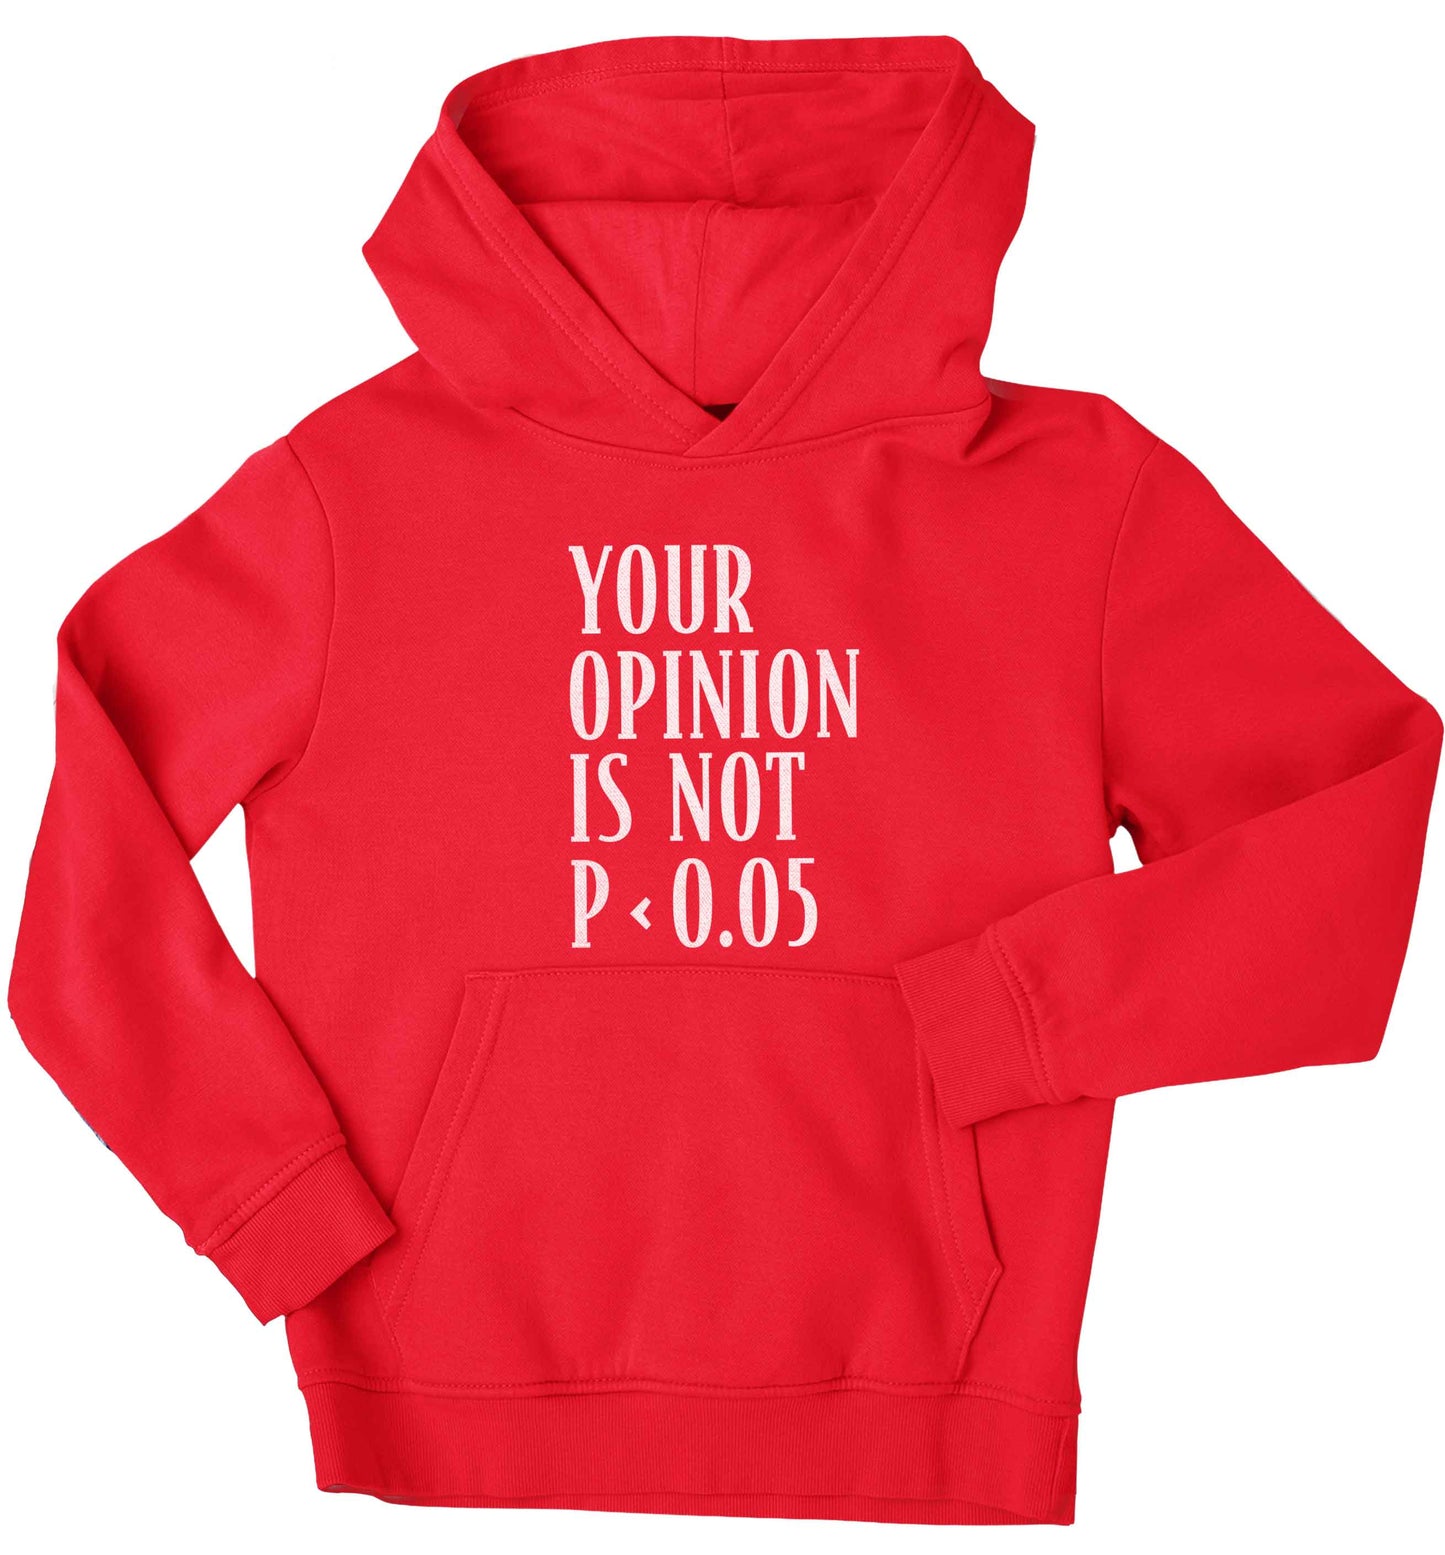 Your opinion is not P < 0.05children's red hoodie 12-13 Years